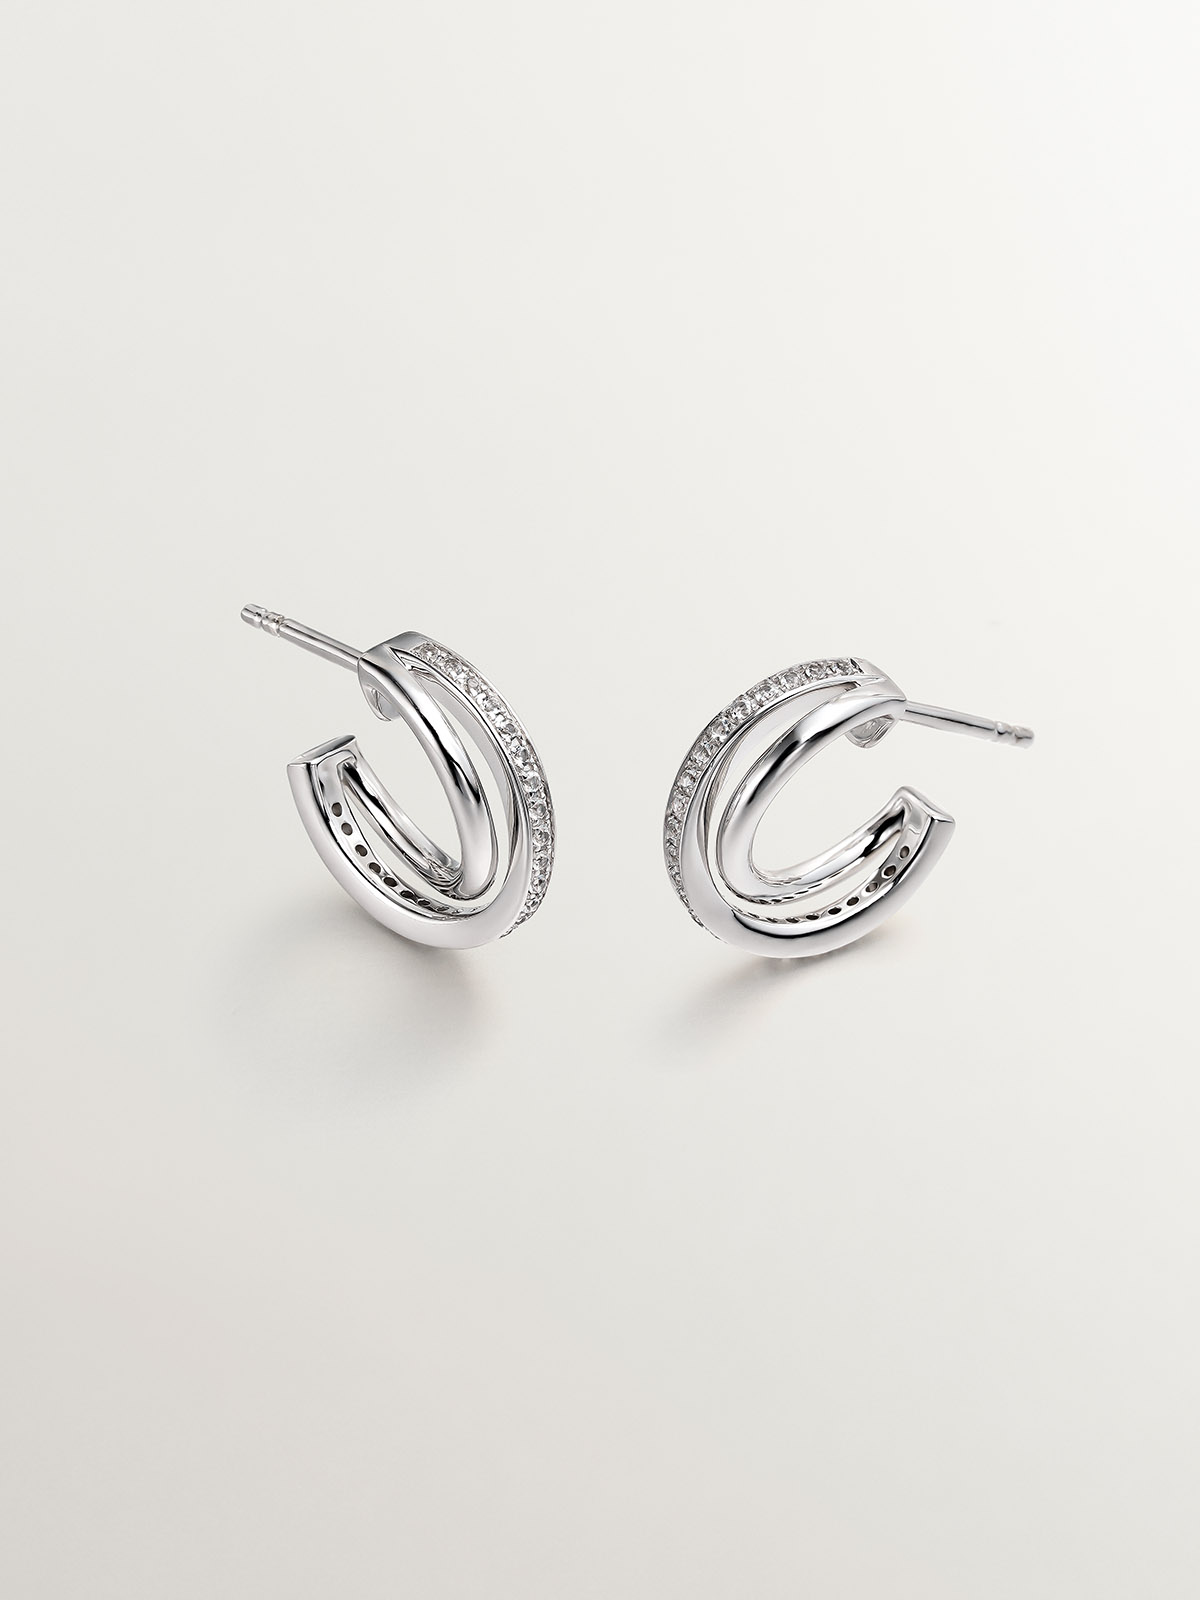 925 Silver double hoop earrings with white topaz.